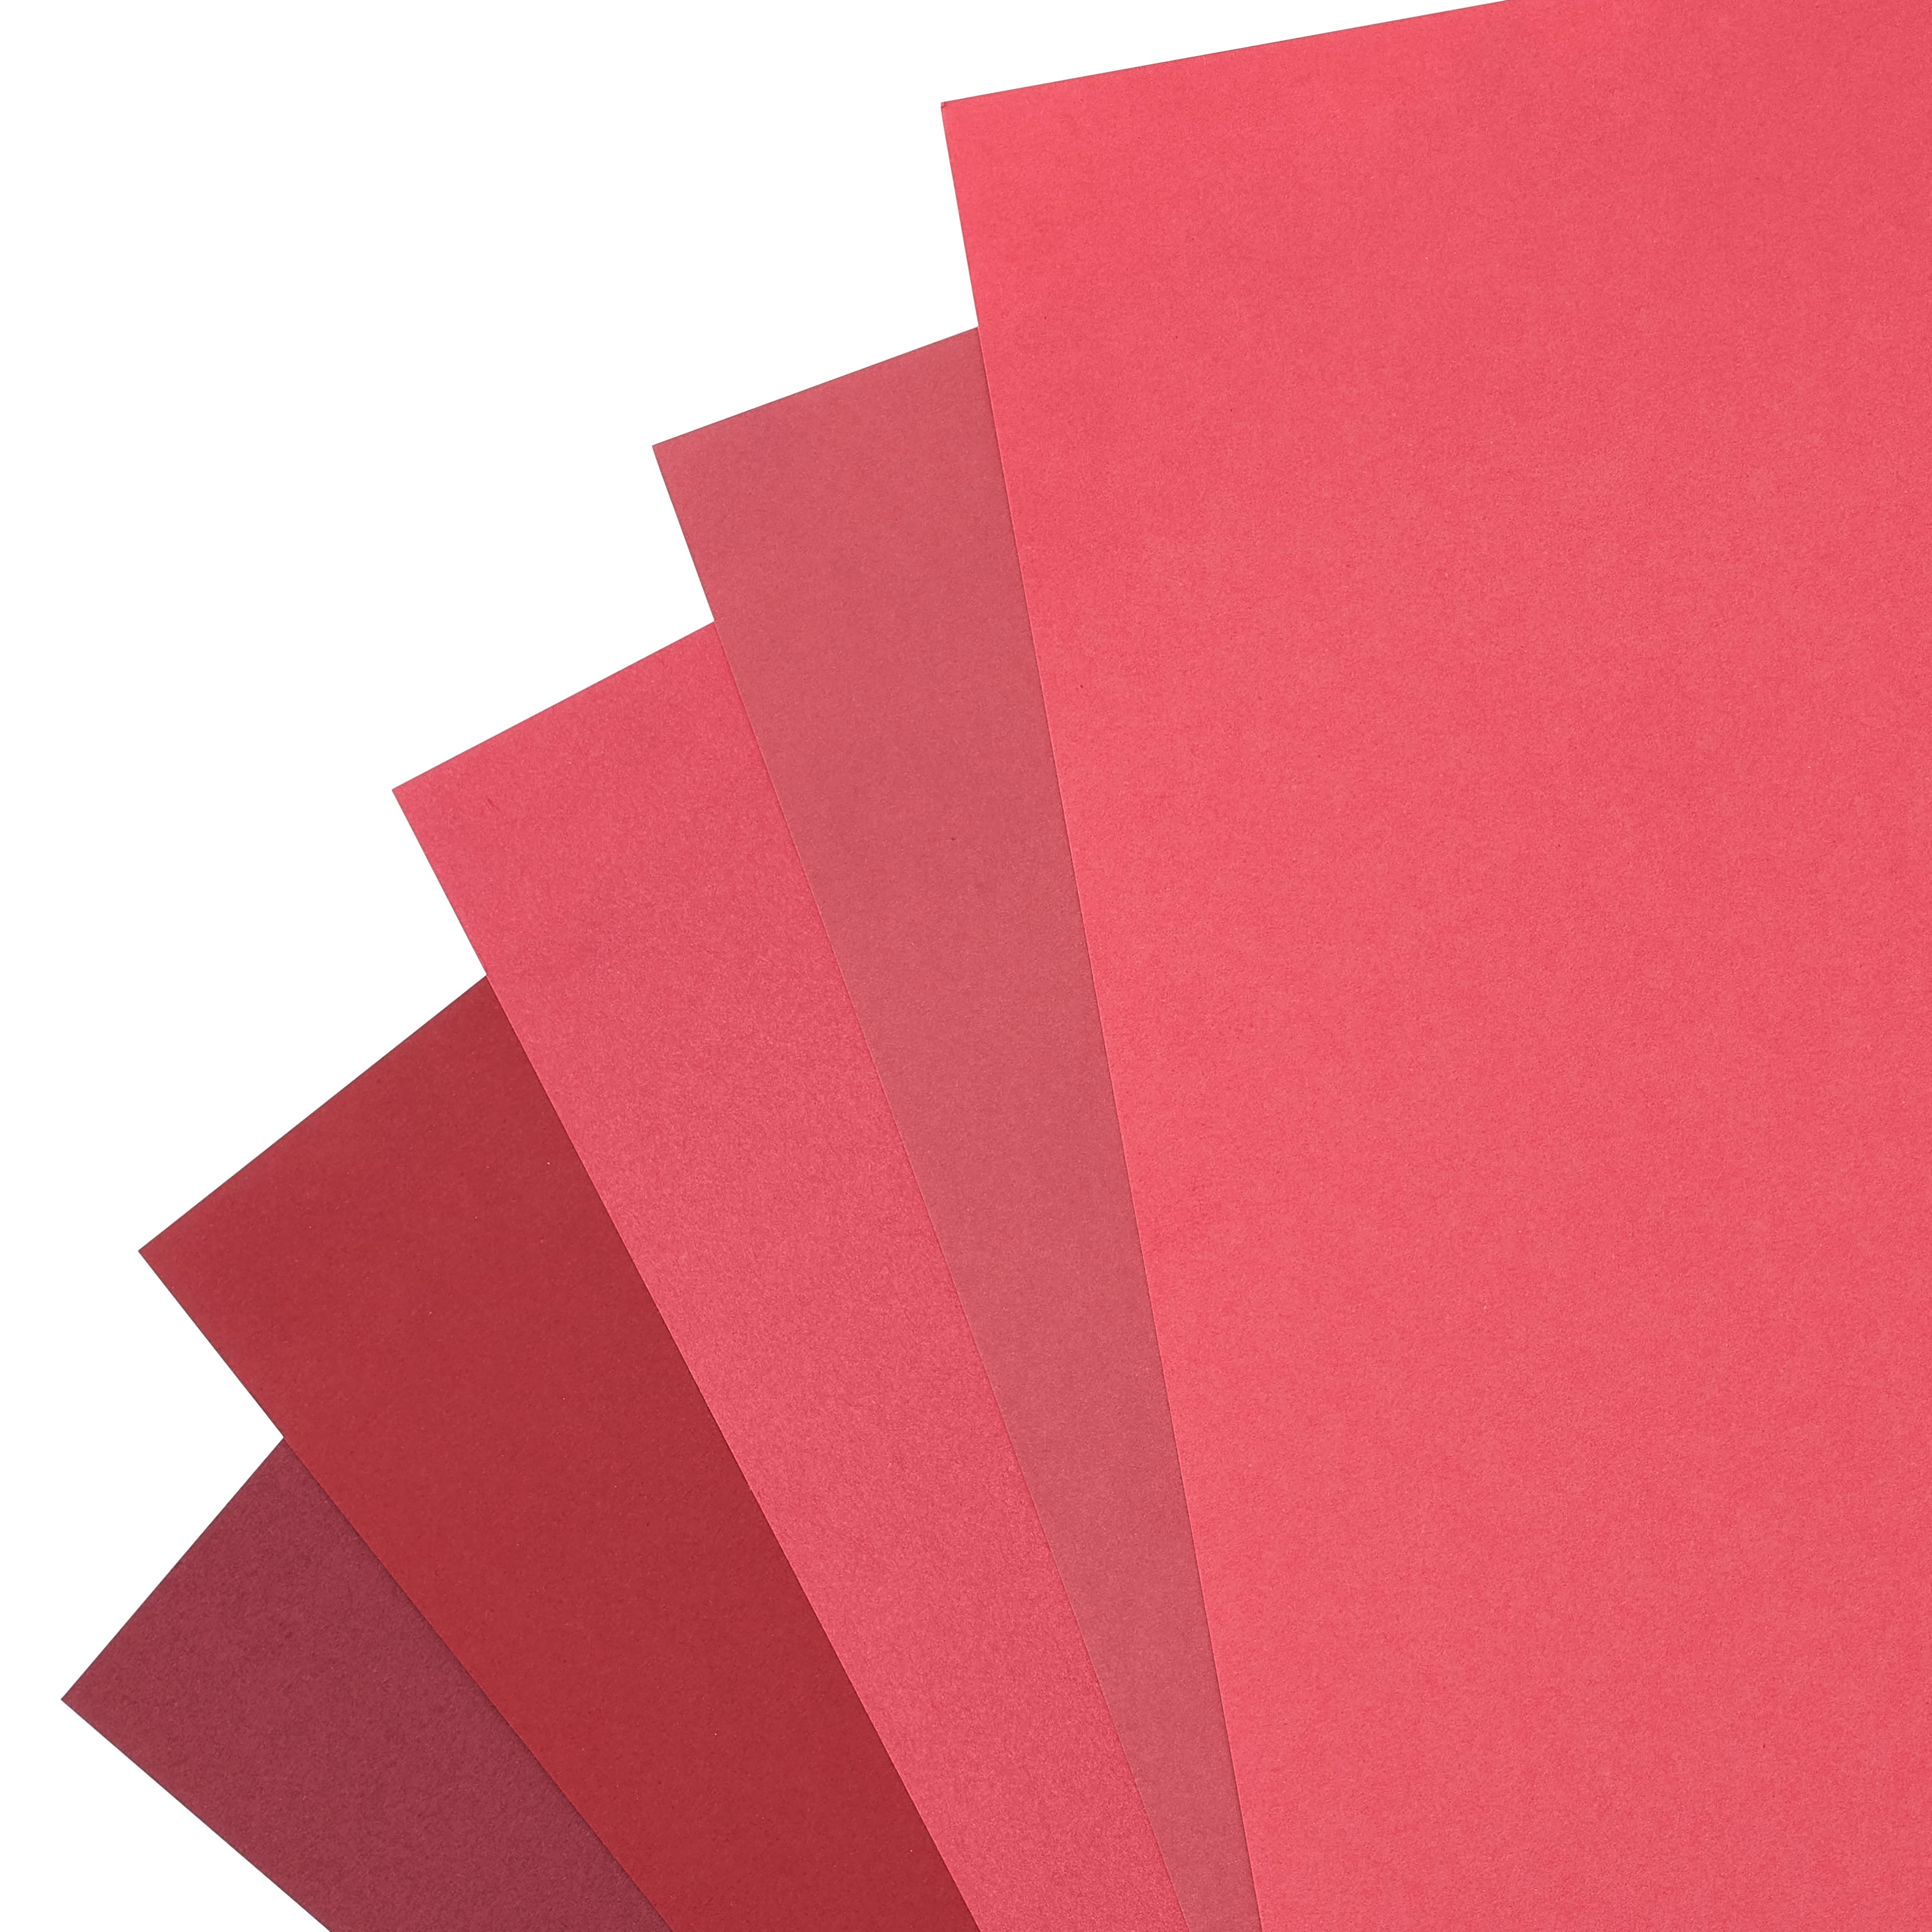 Re-Entry Red Cardstock Paper – 8.5 x 11 Medium Weight 65lb Cover (175gsm)  Card Stock - Great for Arts and Crafts, Scrapbooking, Cards, Invitations